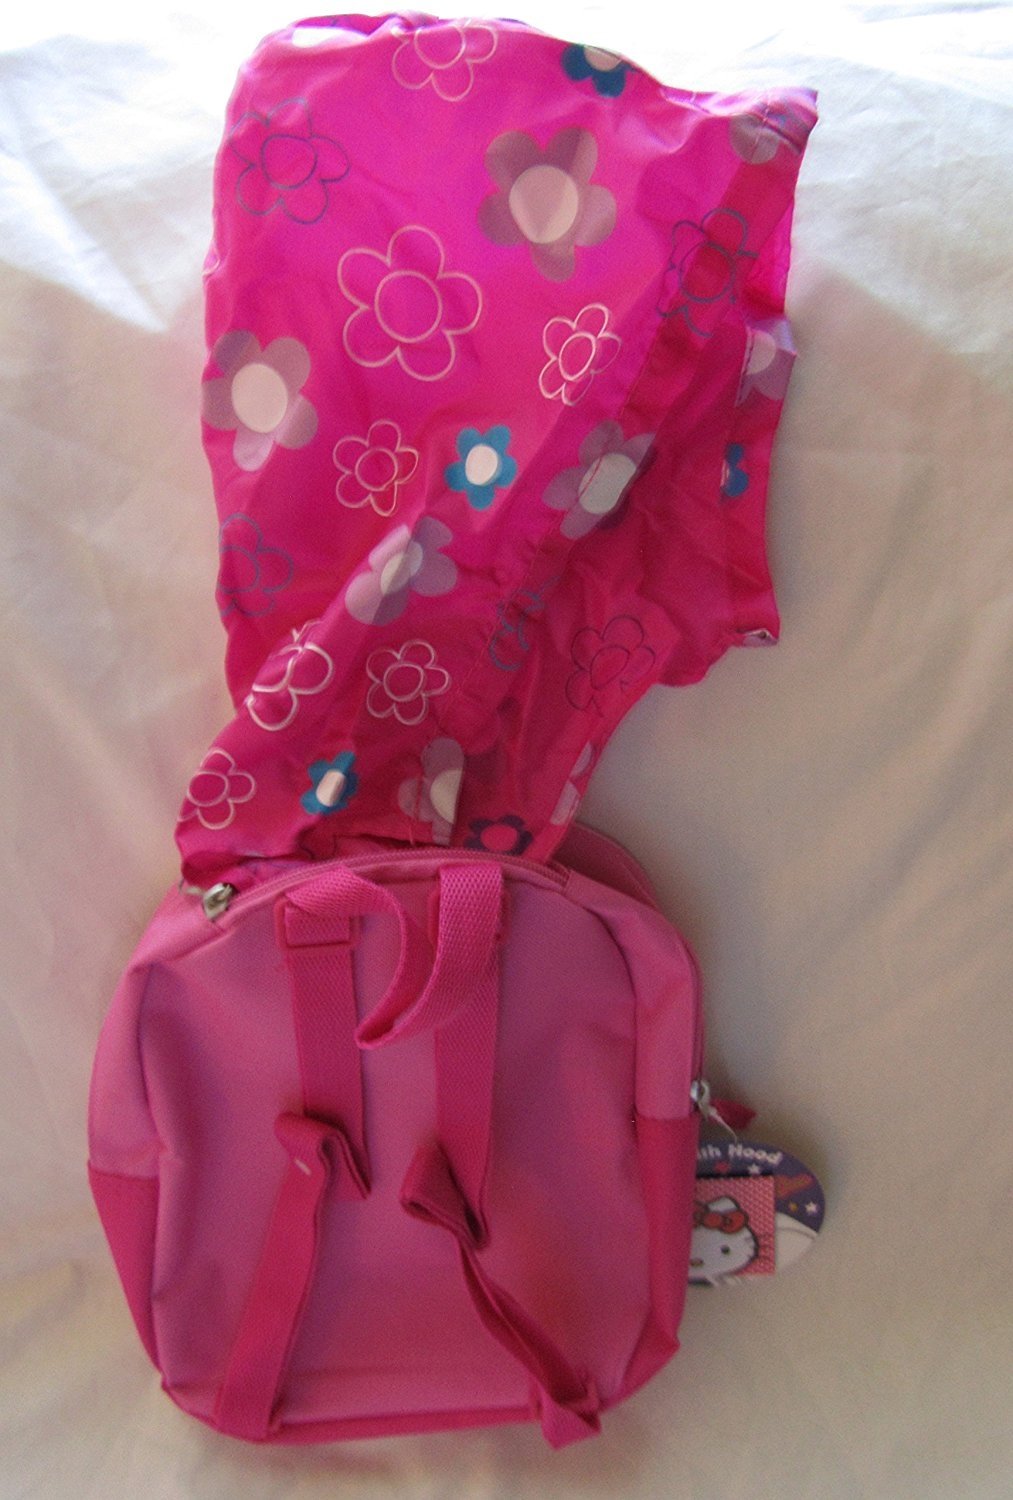 Hello Kitty Youth Backpack with Hood - image 3 of 3